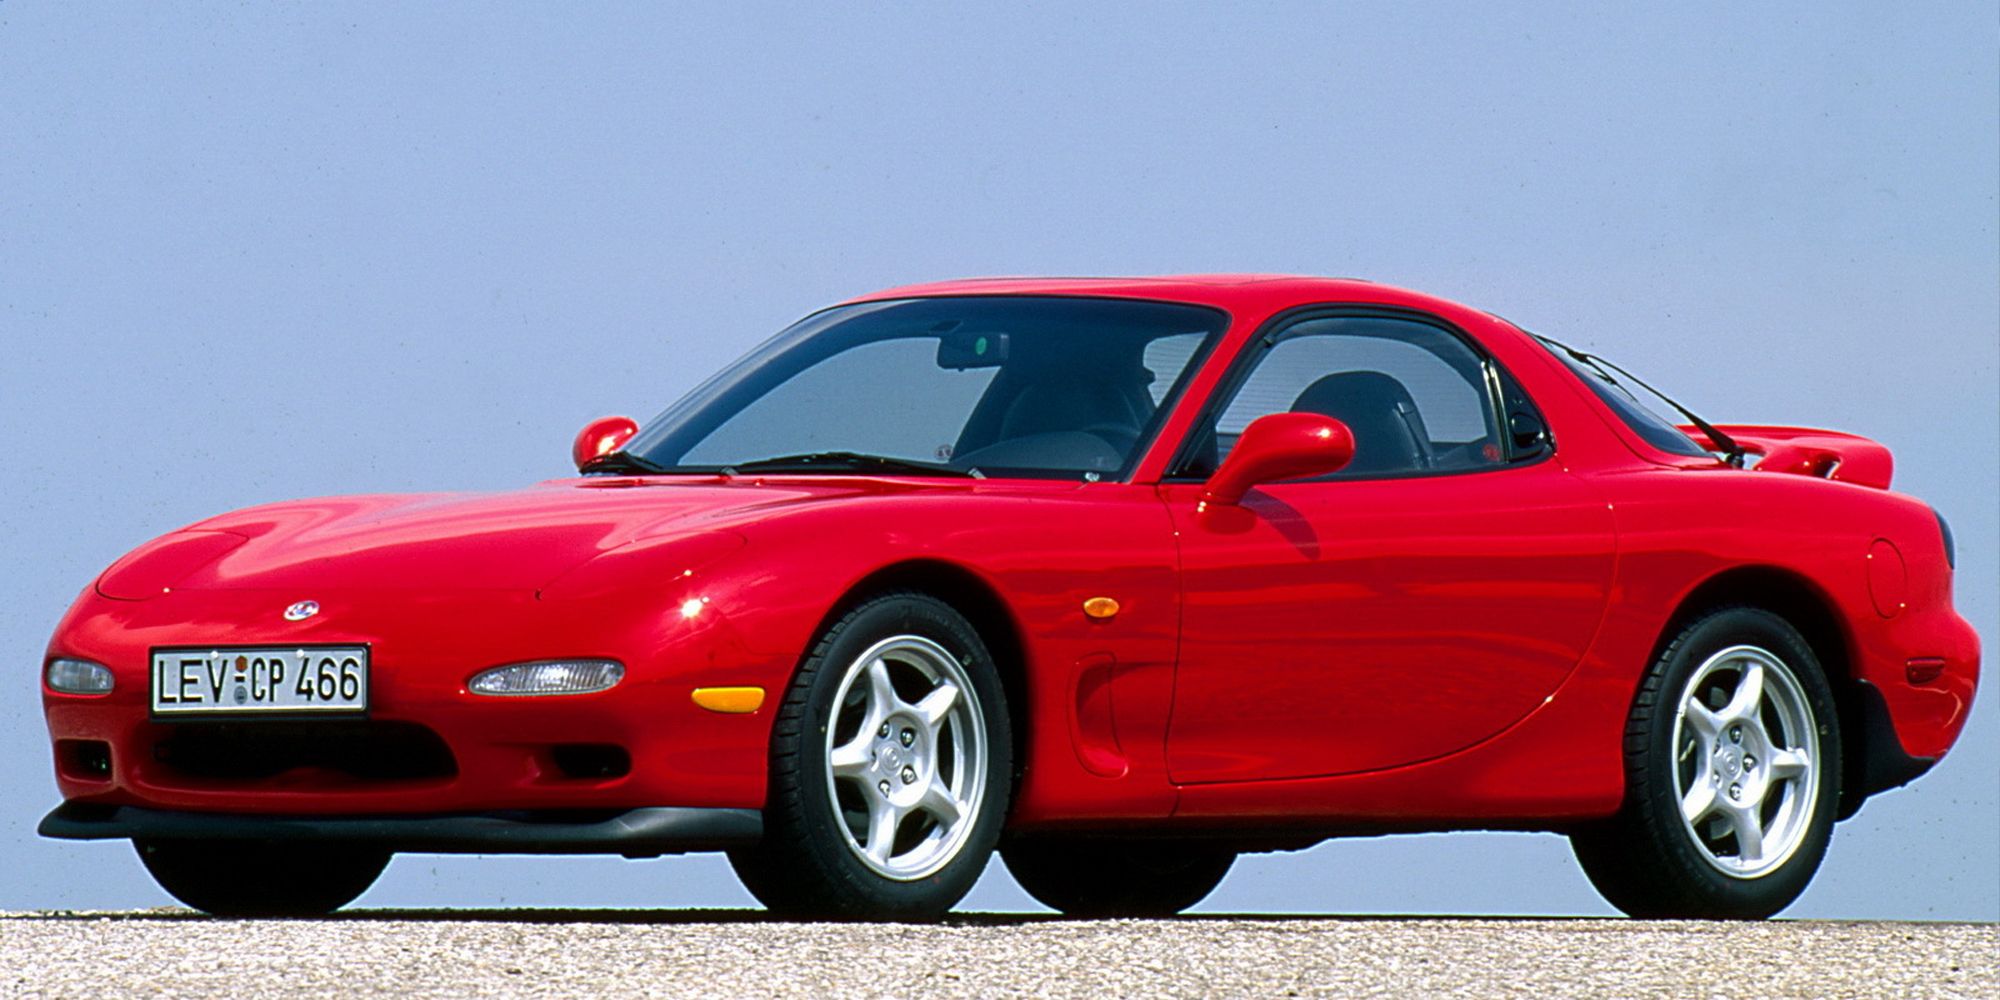 The FD Mazda RX-7 in red